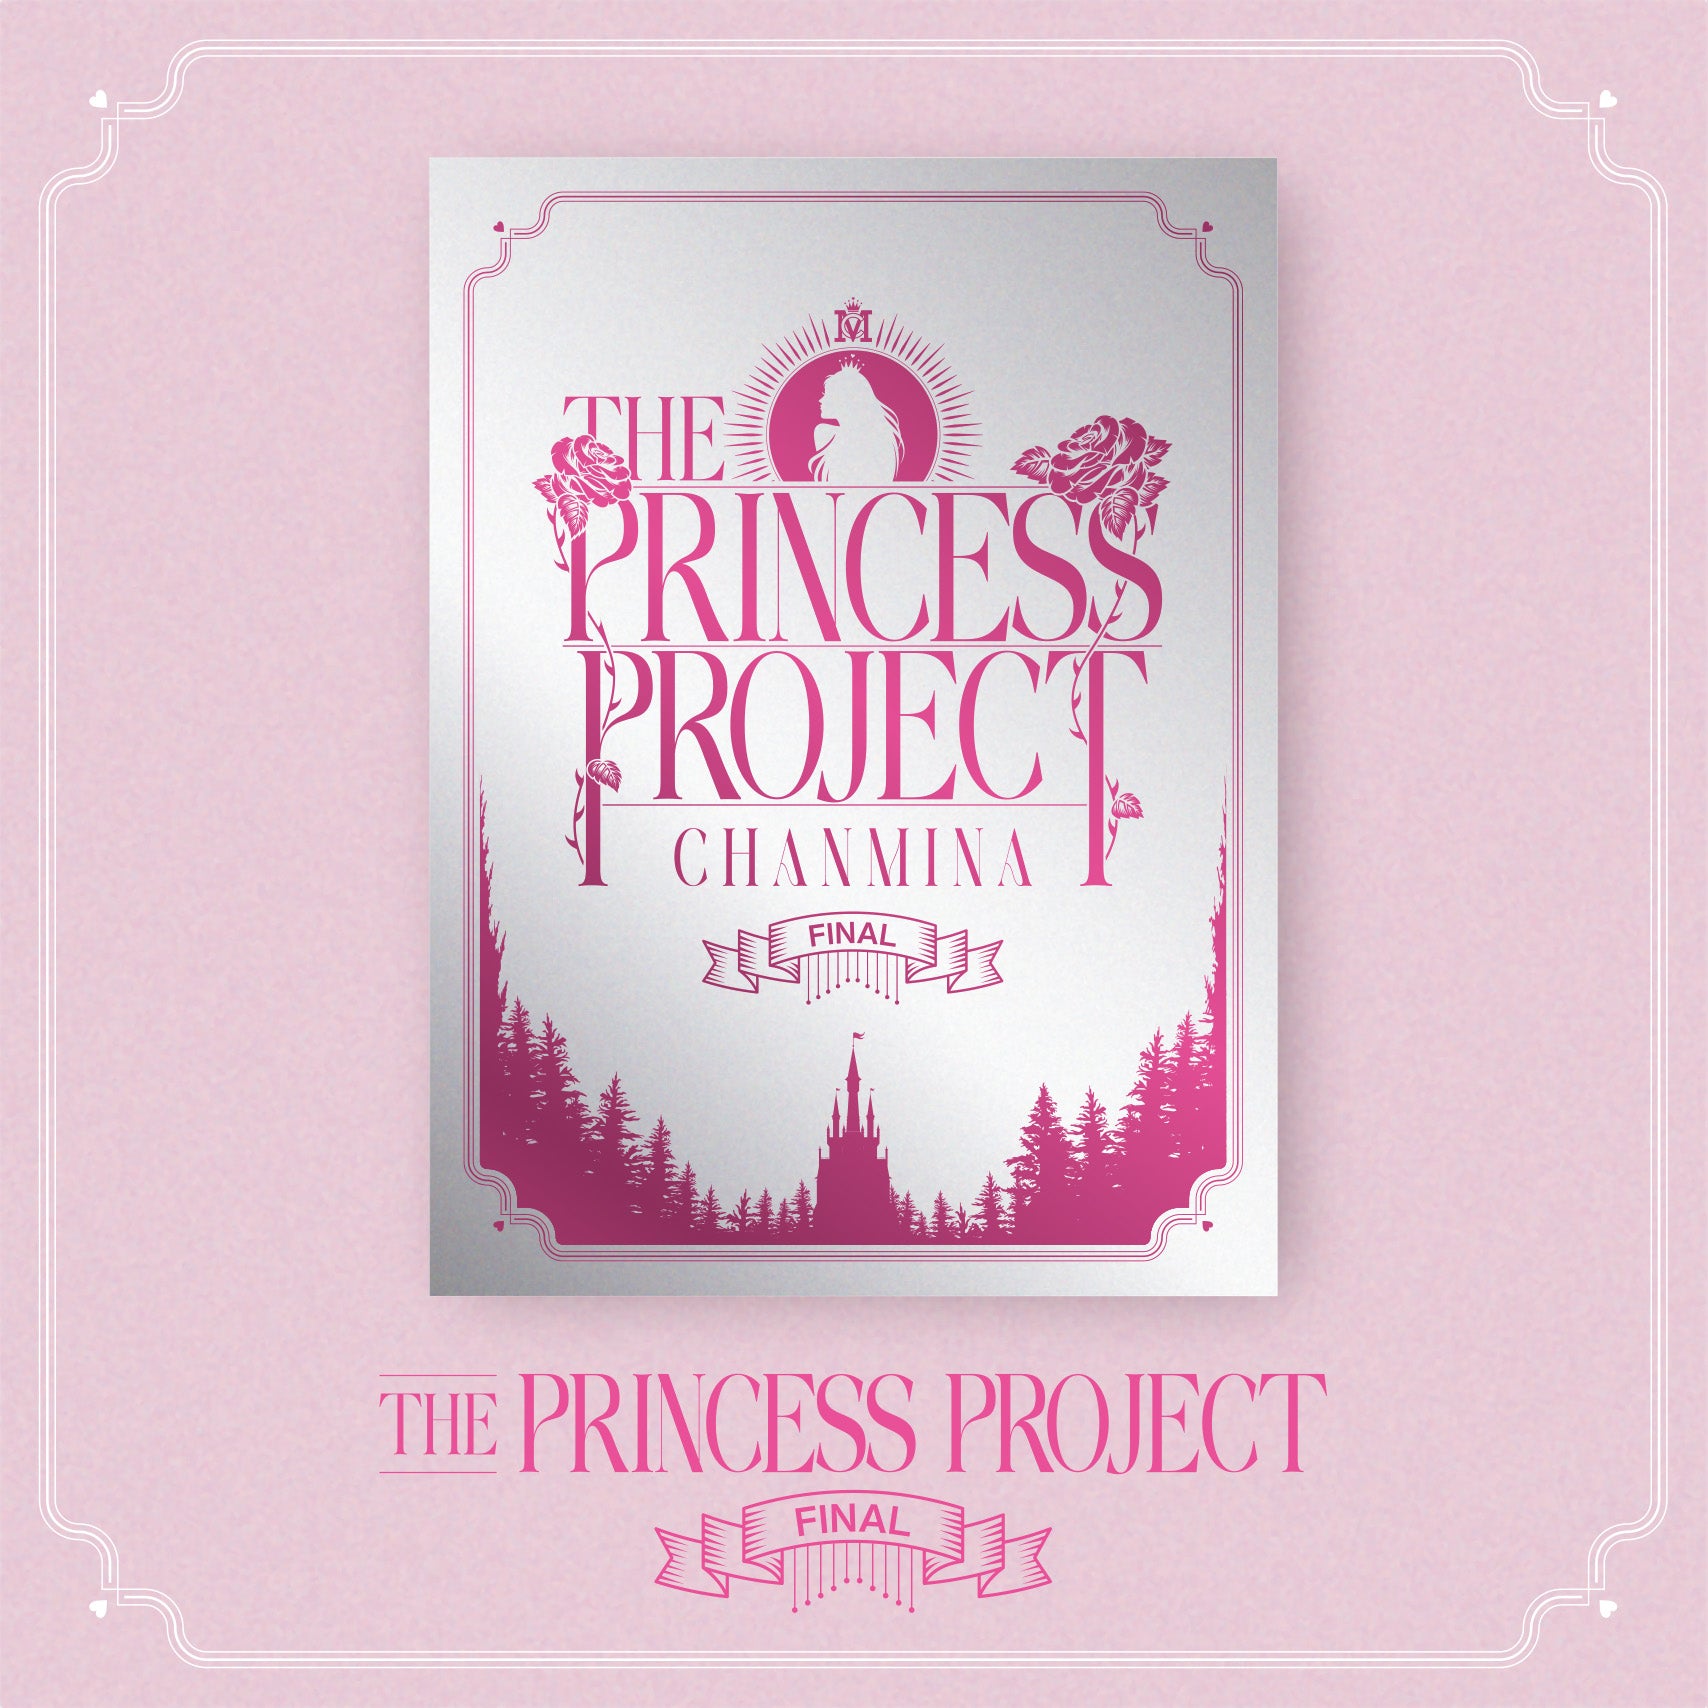 THE PRINCESS PROJECT - FINAL - DVD – ワーナーミュージック・ストア